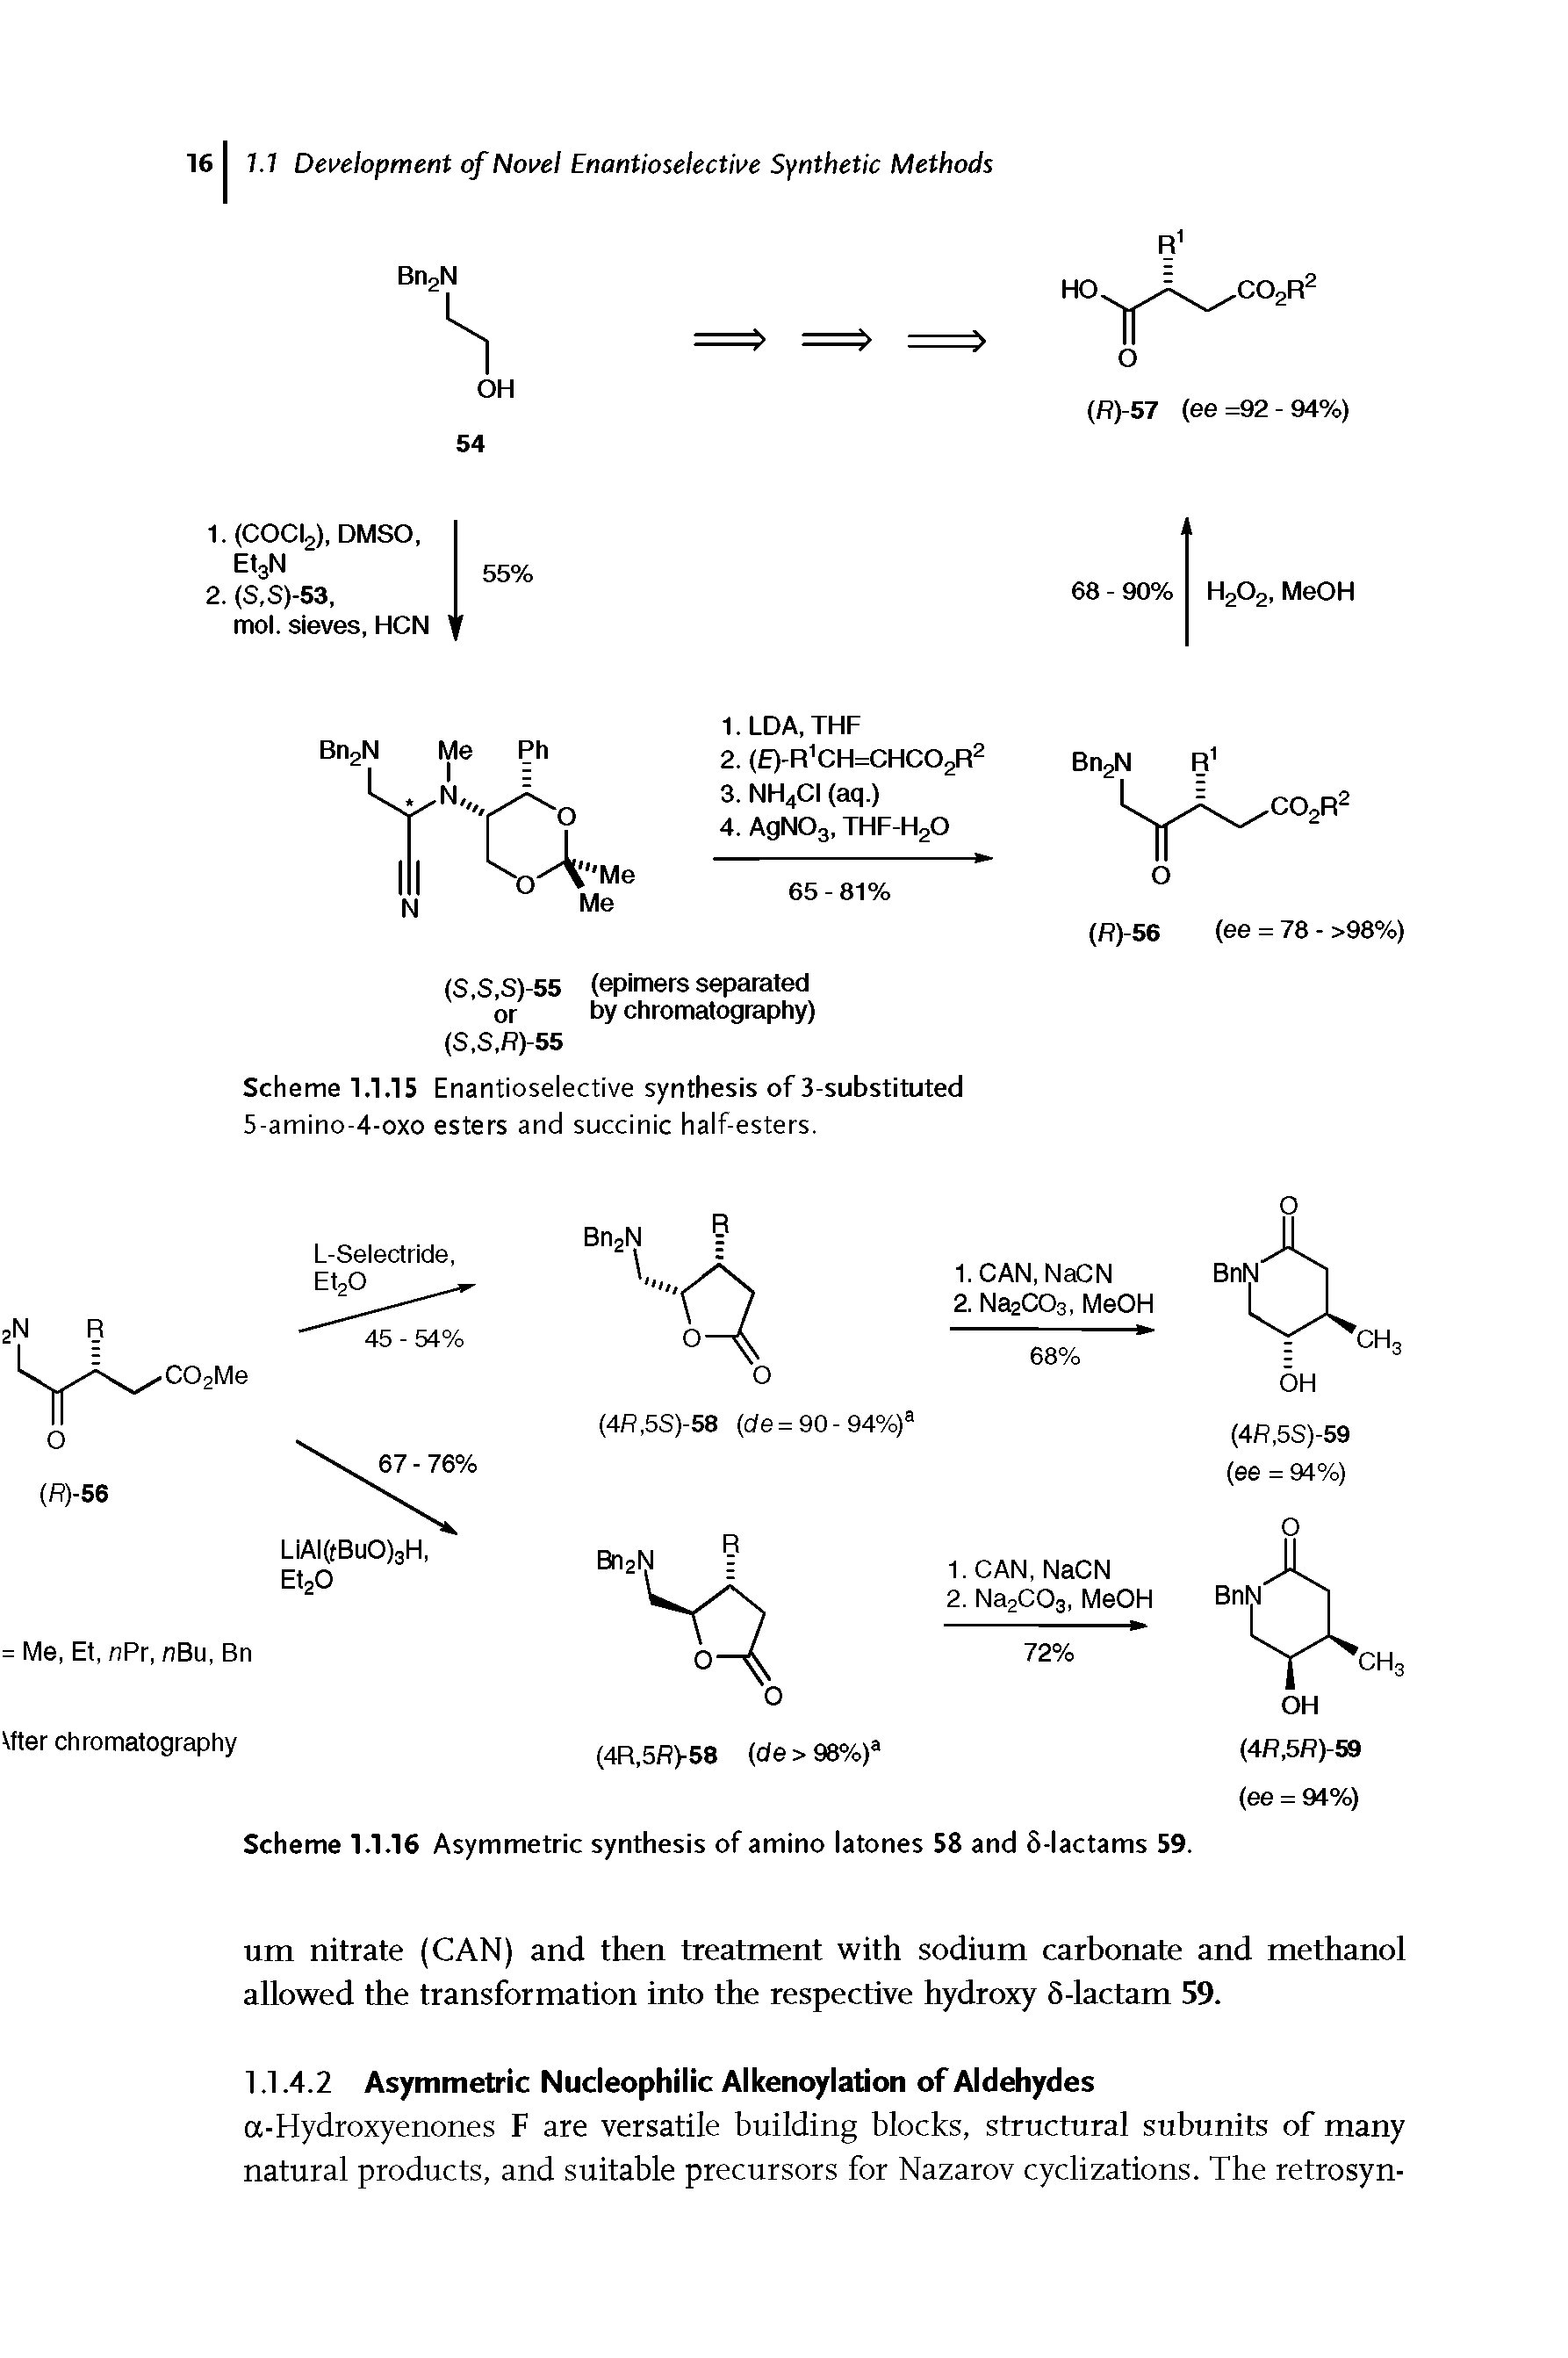 Scheme 1.1.15 Enantioselective synthesis of 3-substituted 5-amino-4-oxo esters and succinic half-esters.